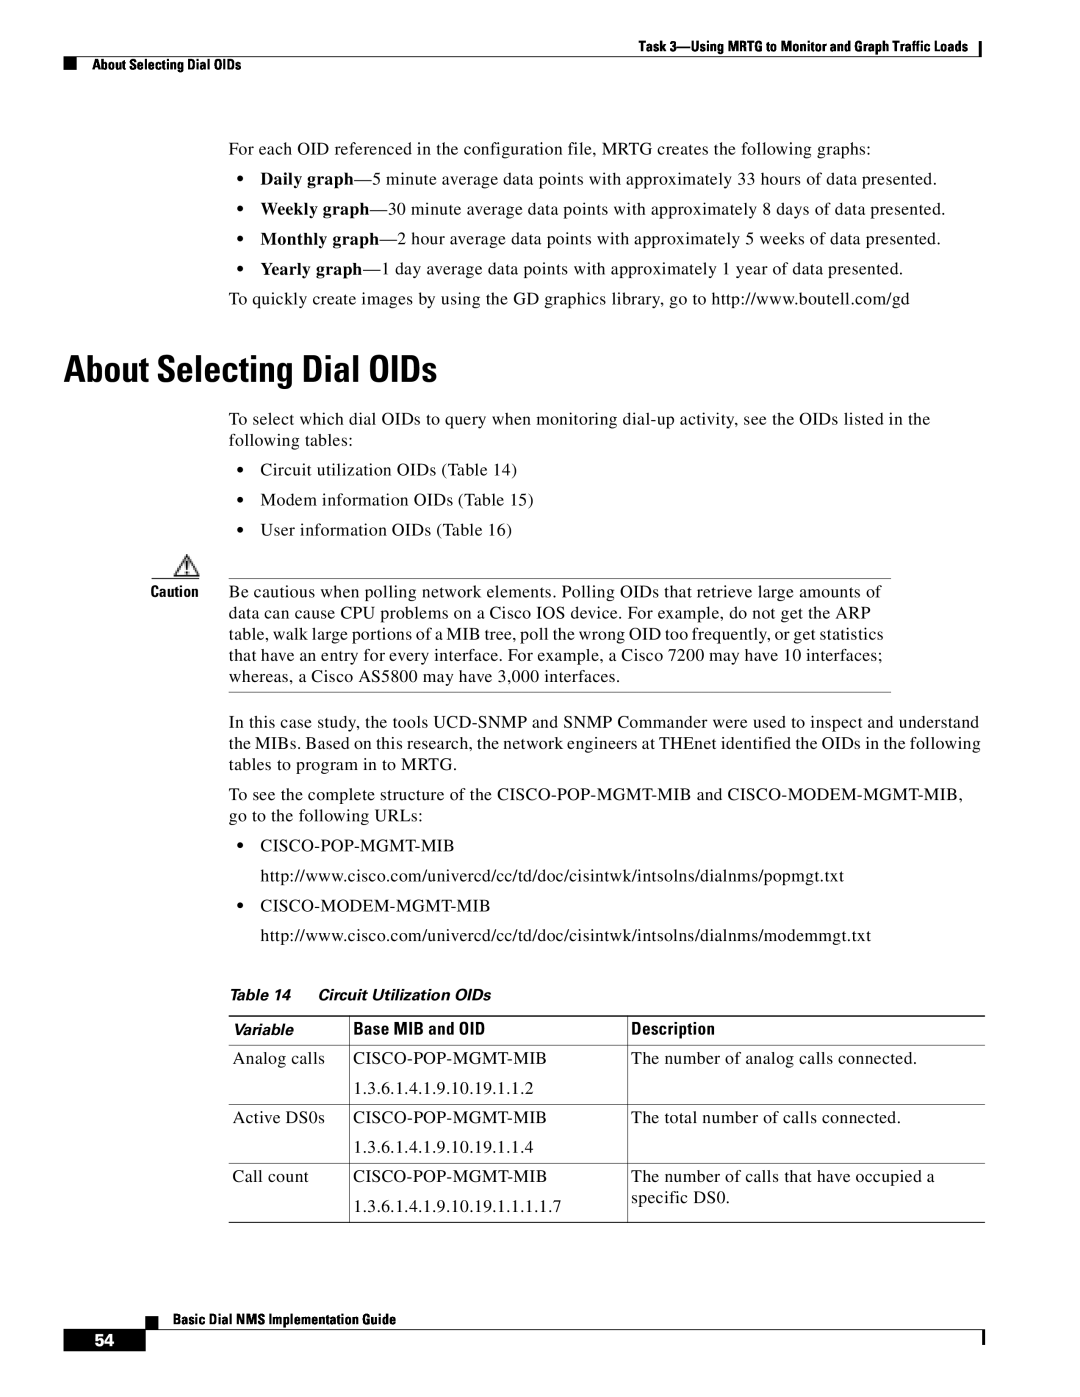 Cisco Systems Dial NMS manual About Selecting Dial OIDs, Circuit Utilization OIDs, Variable 